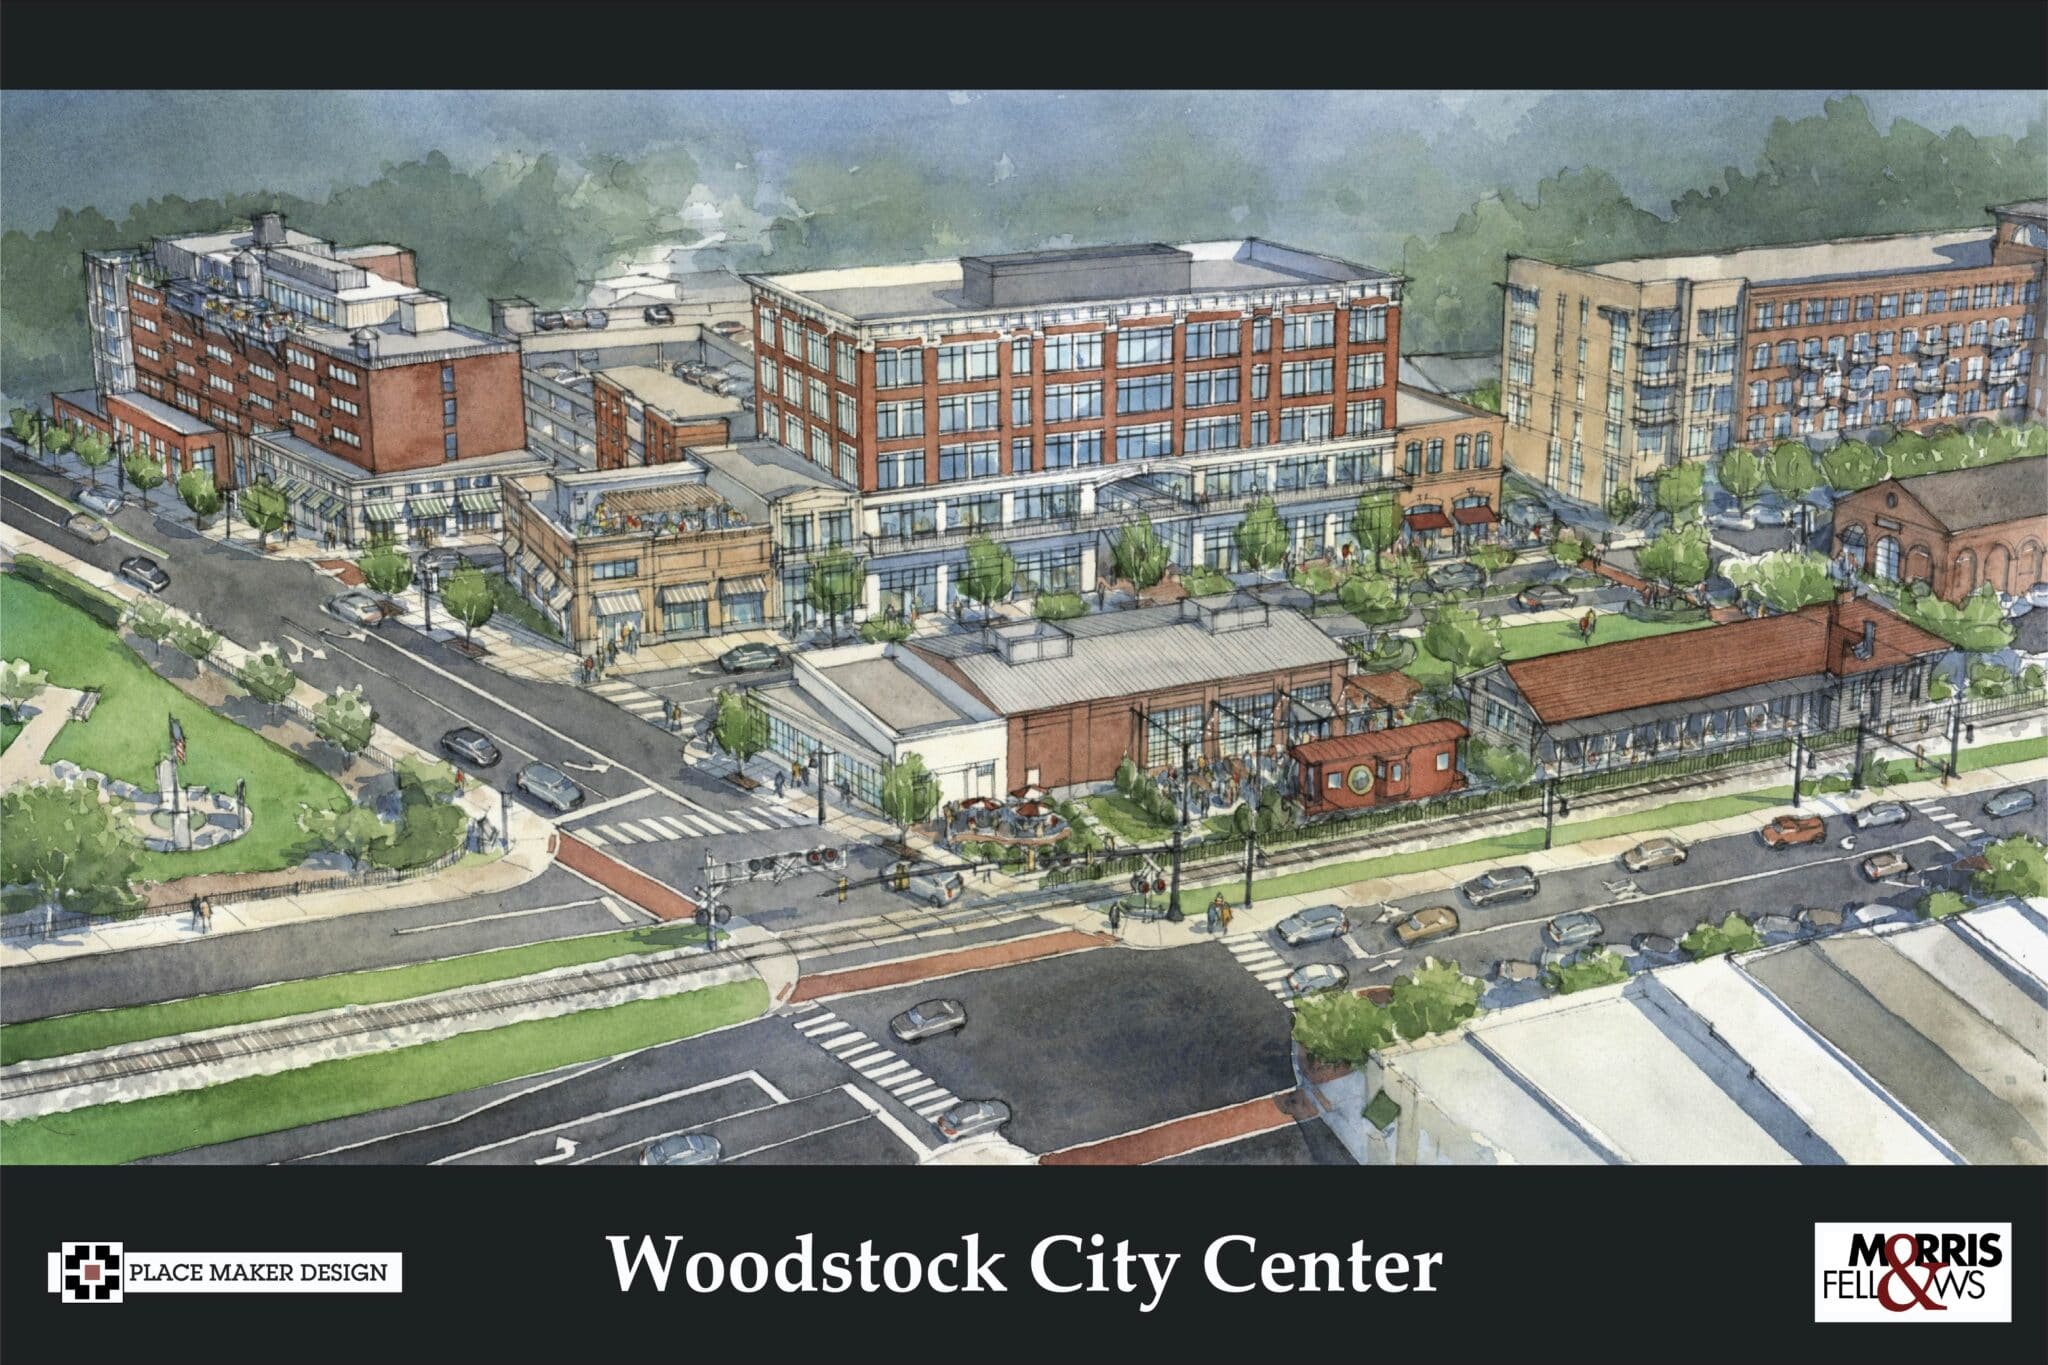 Woodstock reveals plans for City Center project